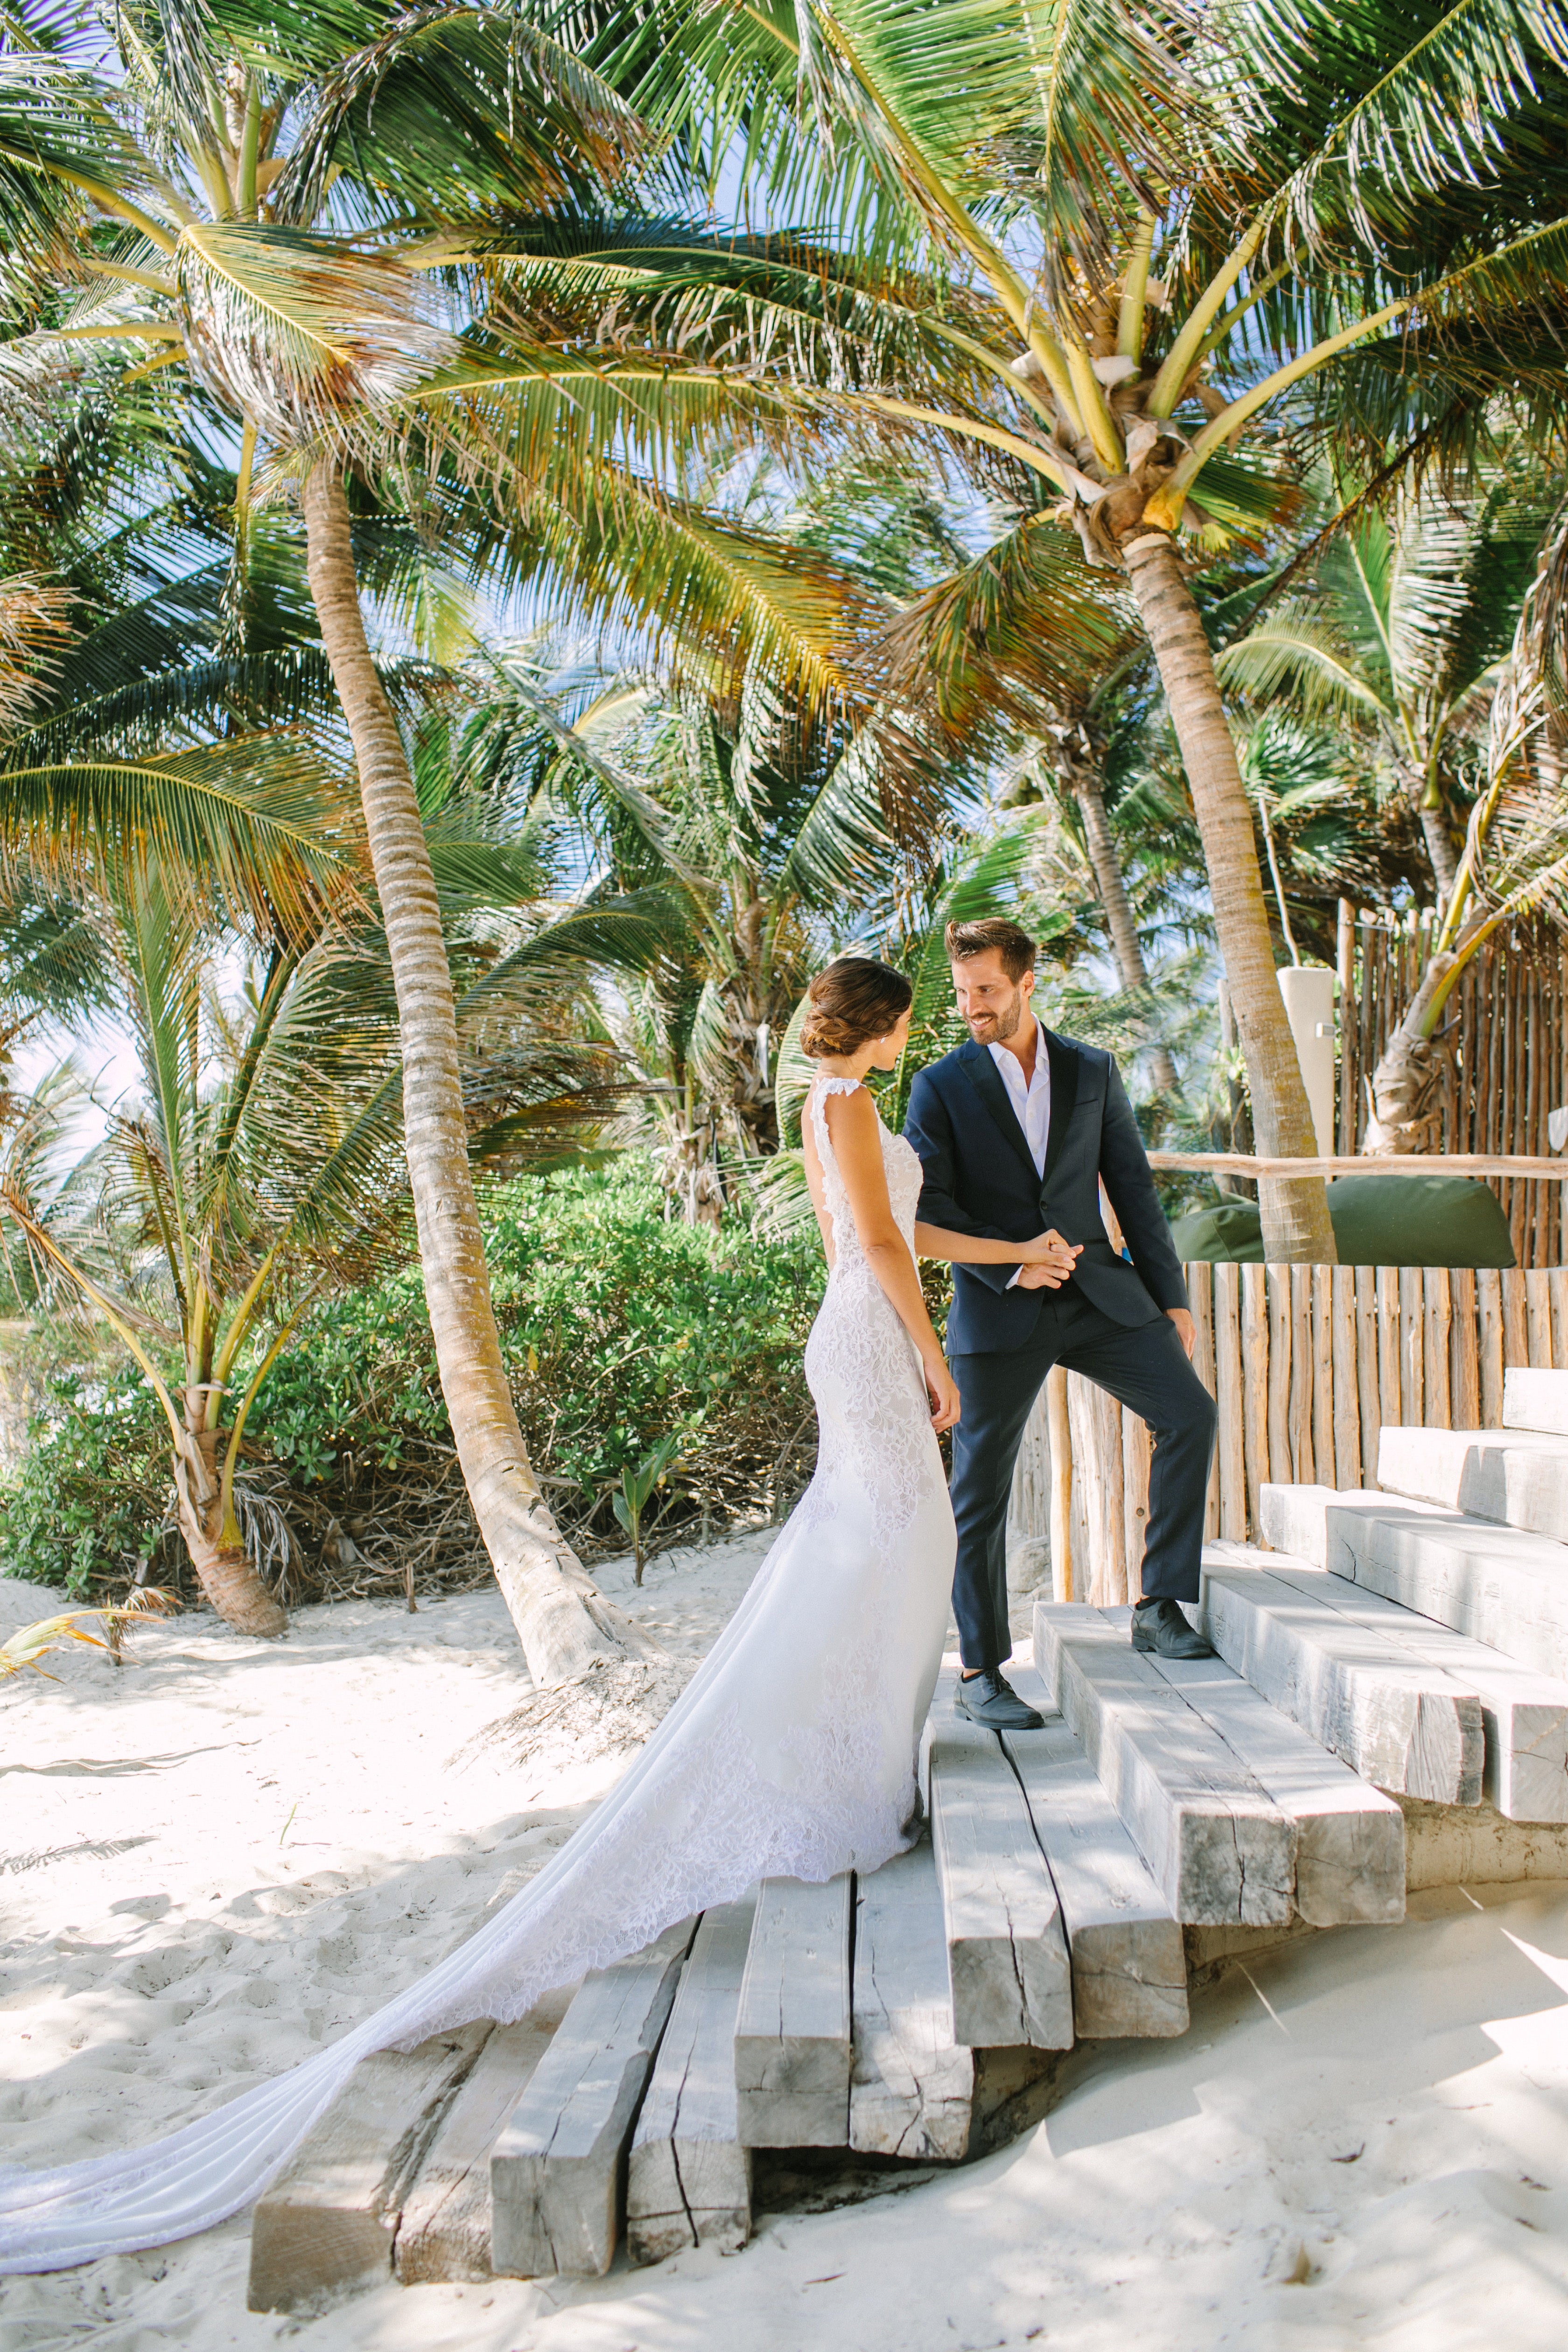 We’re Obsessed with Weddings in Tulum–Here’s Why! We took Kleinfeld Bridal wedding dresses and Kleinfeld Bridal Party bridesmaids dresses to Tulum, Mexico for a fun photoshoot on the beach full of flowers, sun, sand and fun!